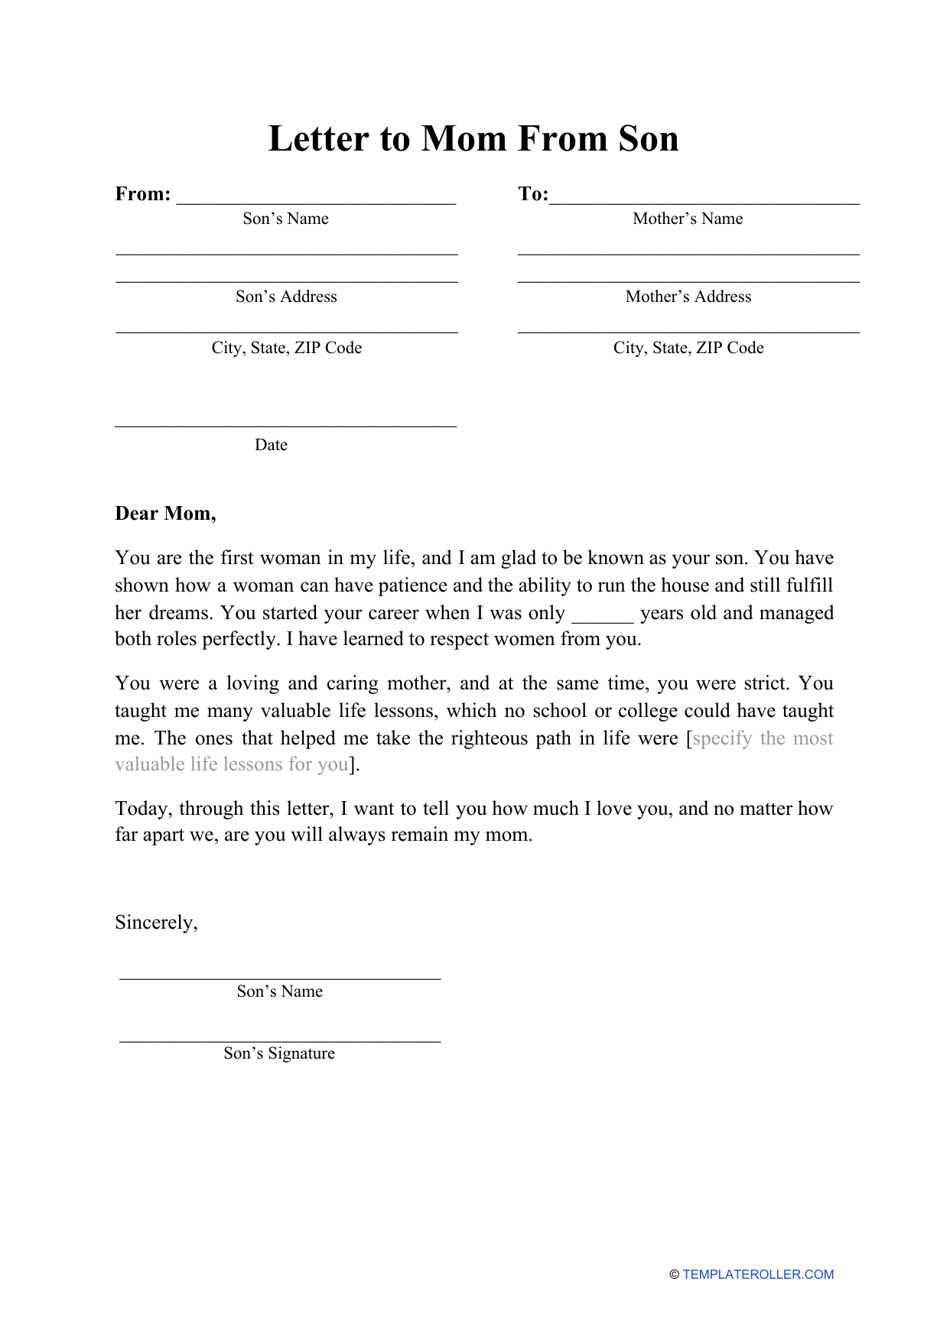 Letter to Mom From Son Template Download Printable PDF Templateroller